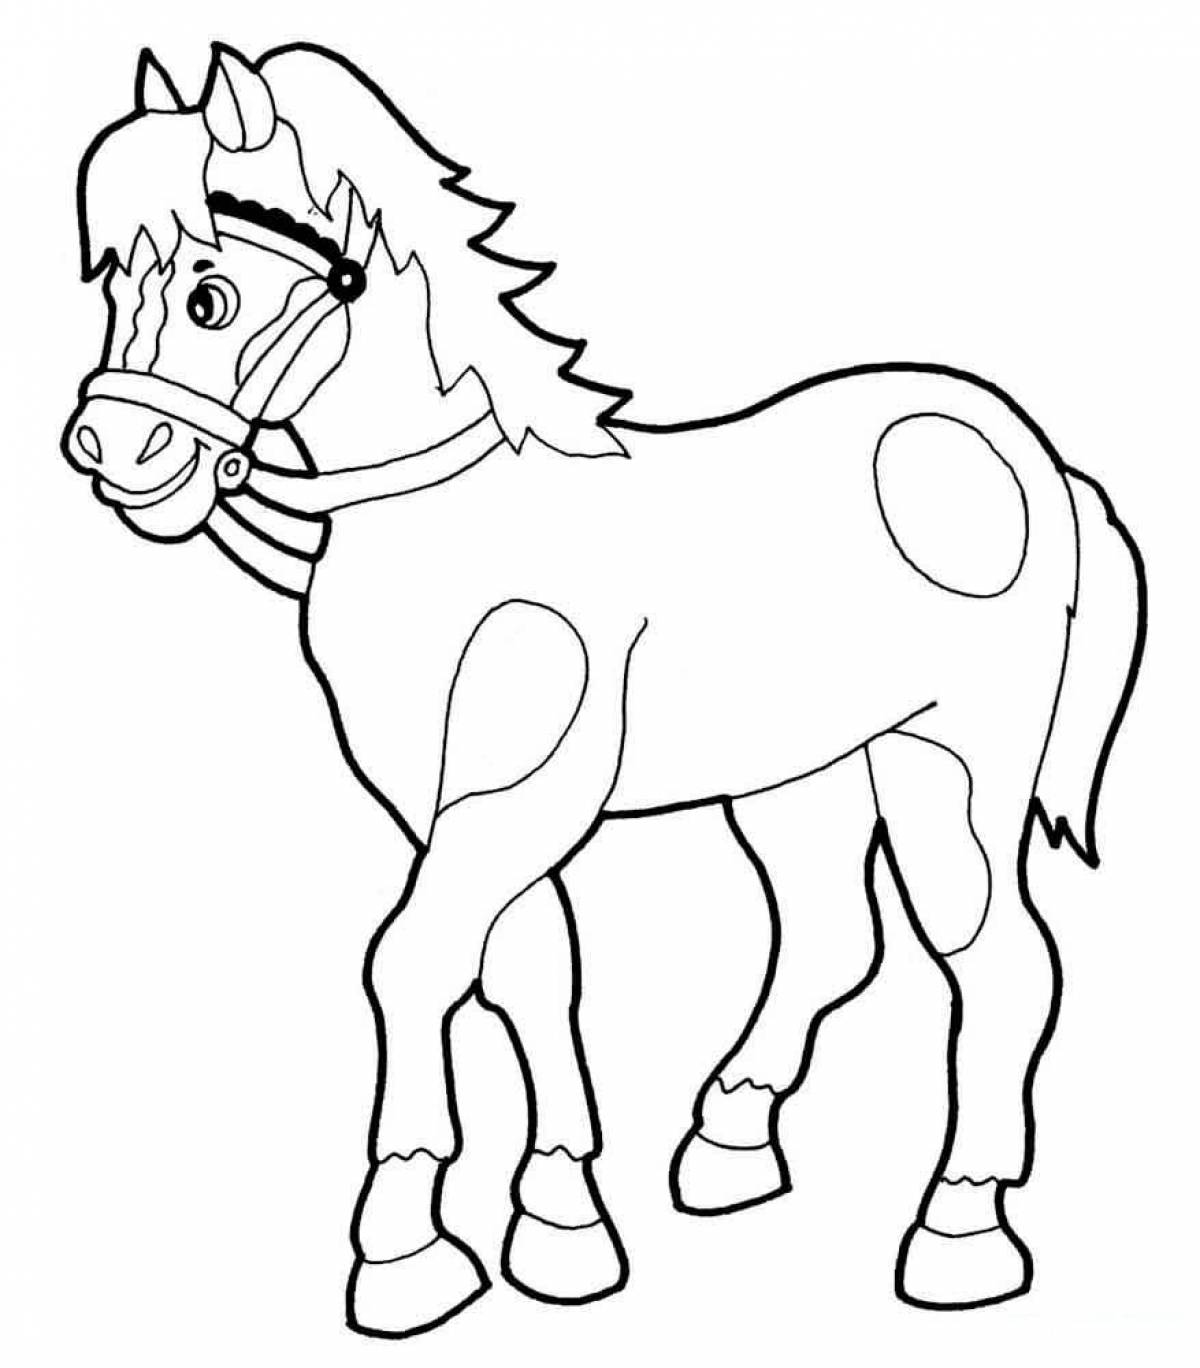 Coloring page energetic colt foal horse for kids